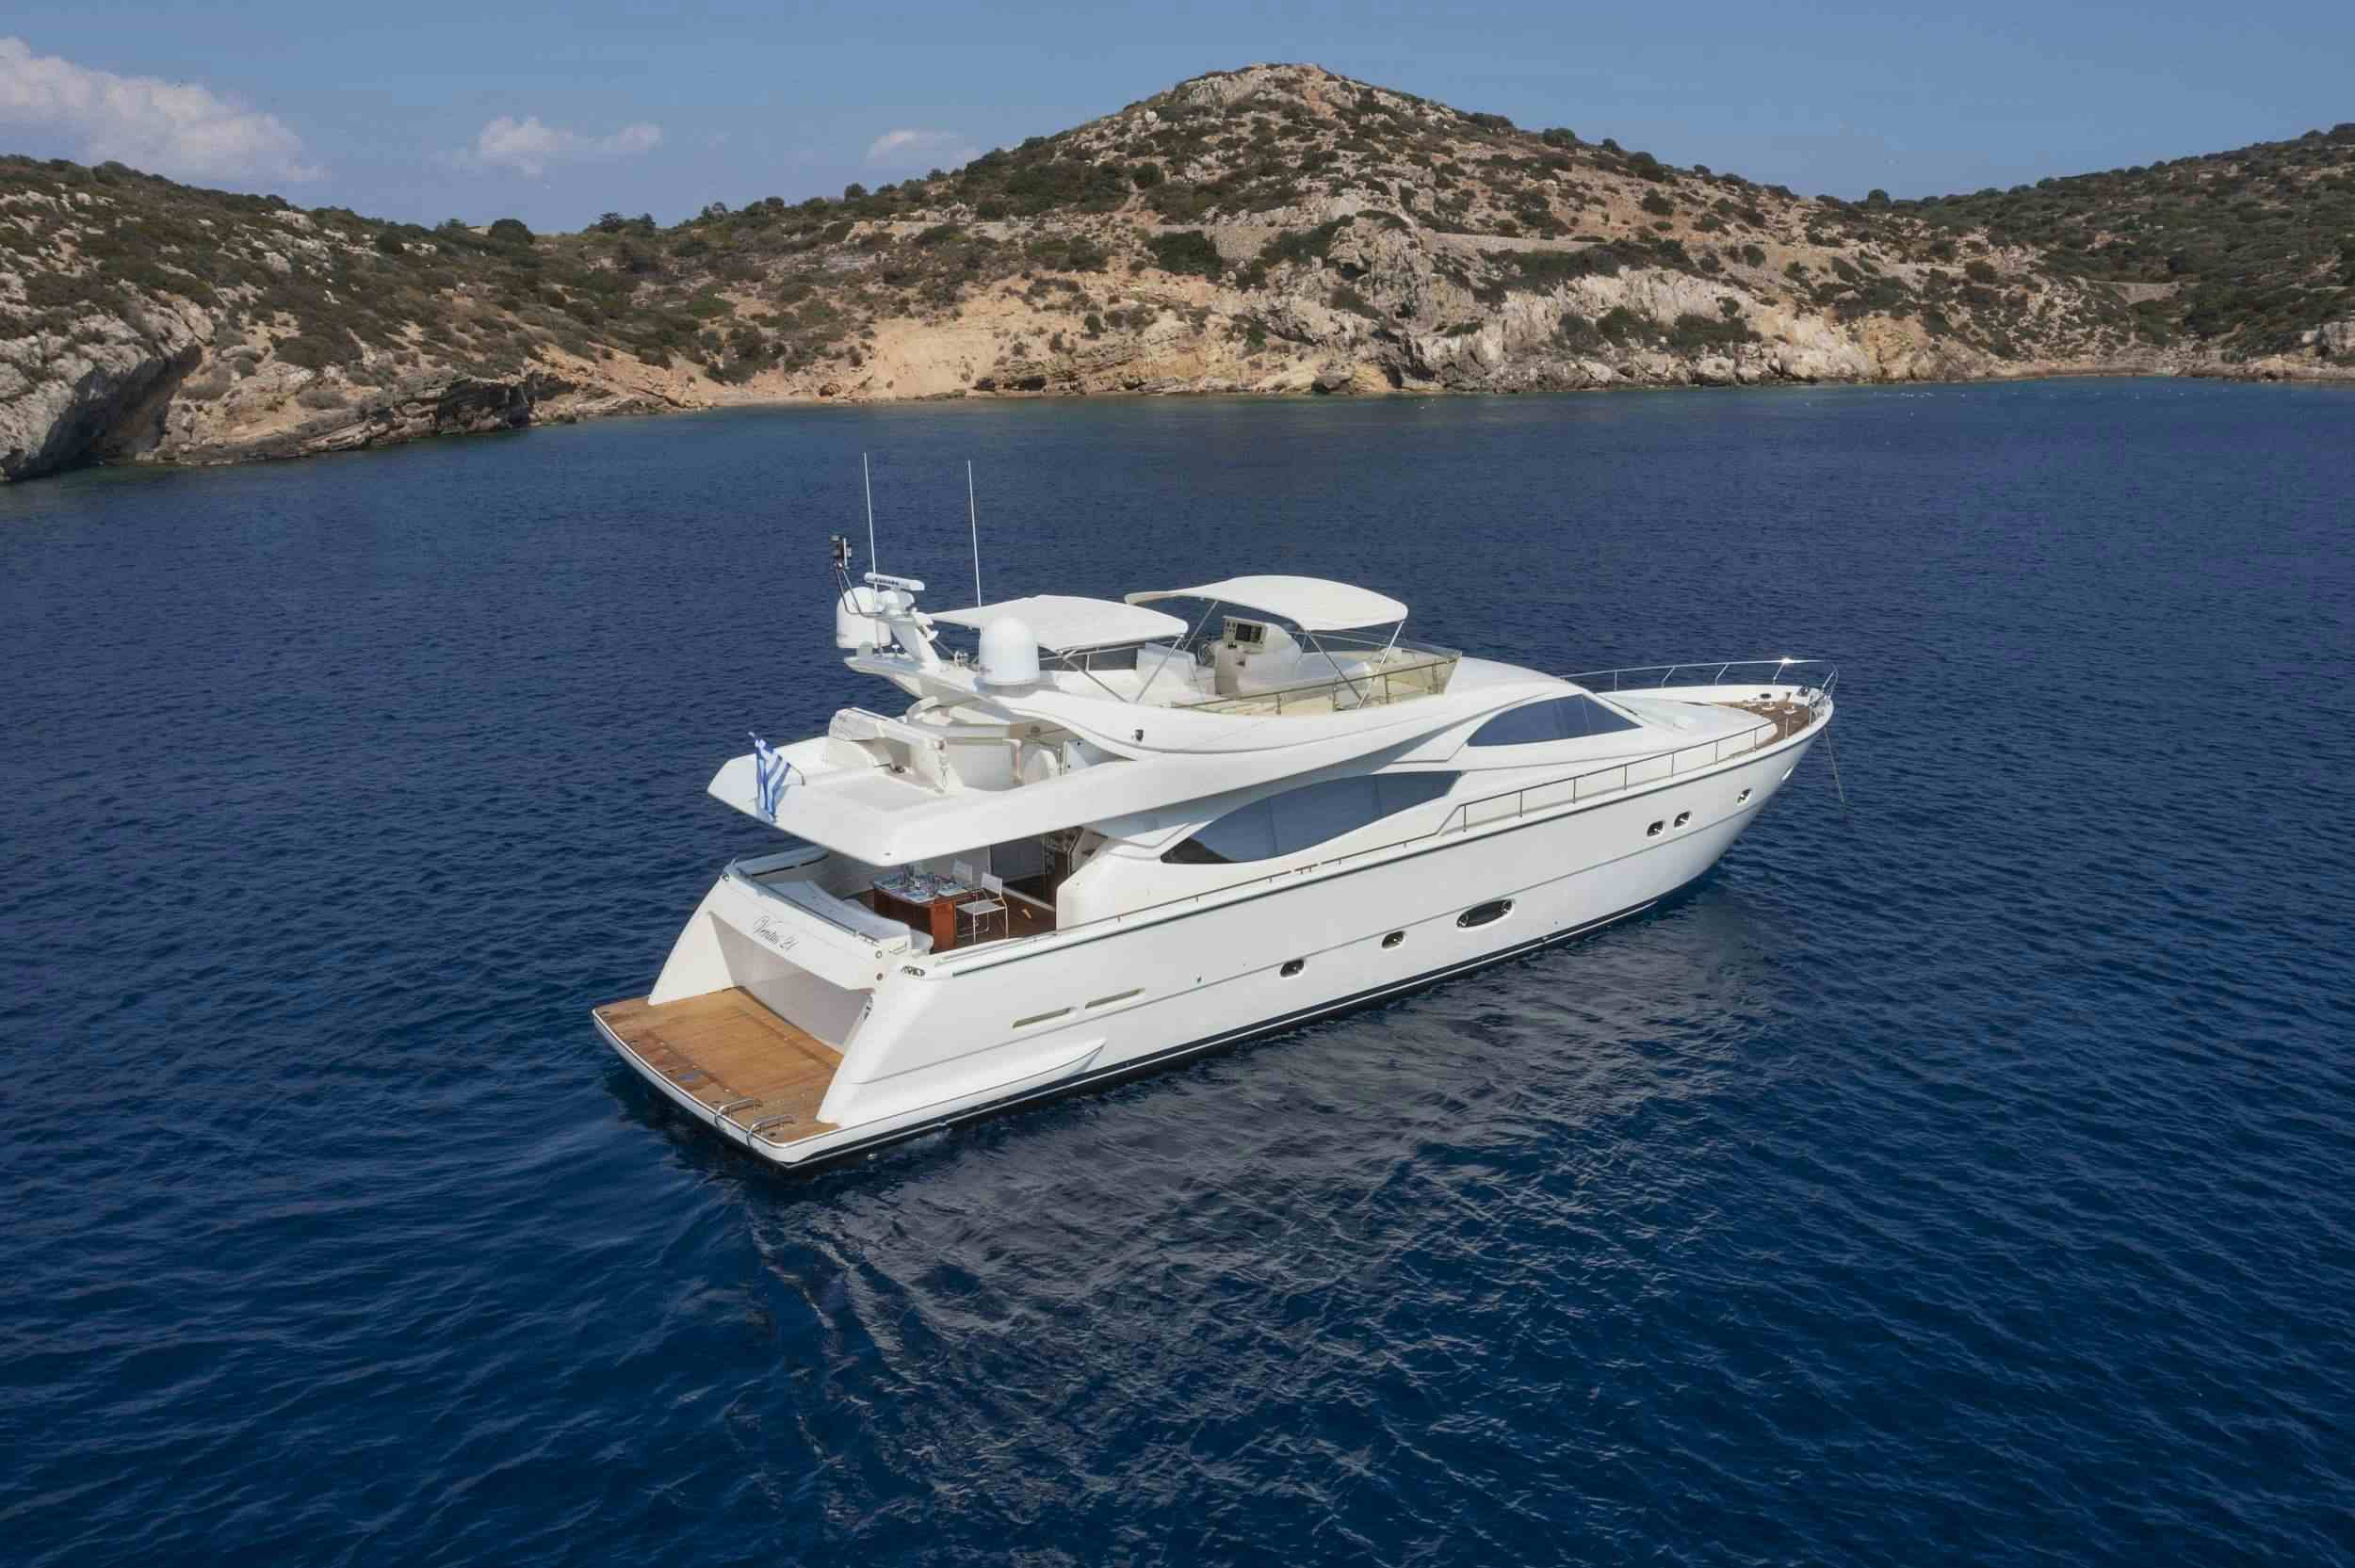 Ventus 21 - Yacht Charter Sami & Boat hire in Greece 1